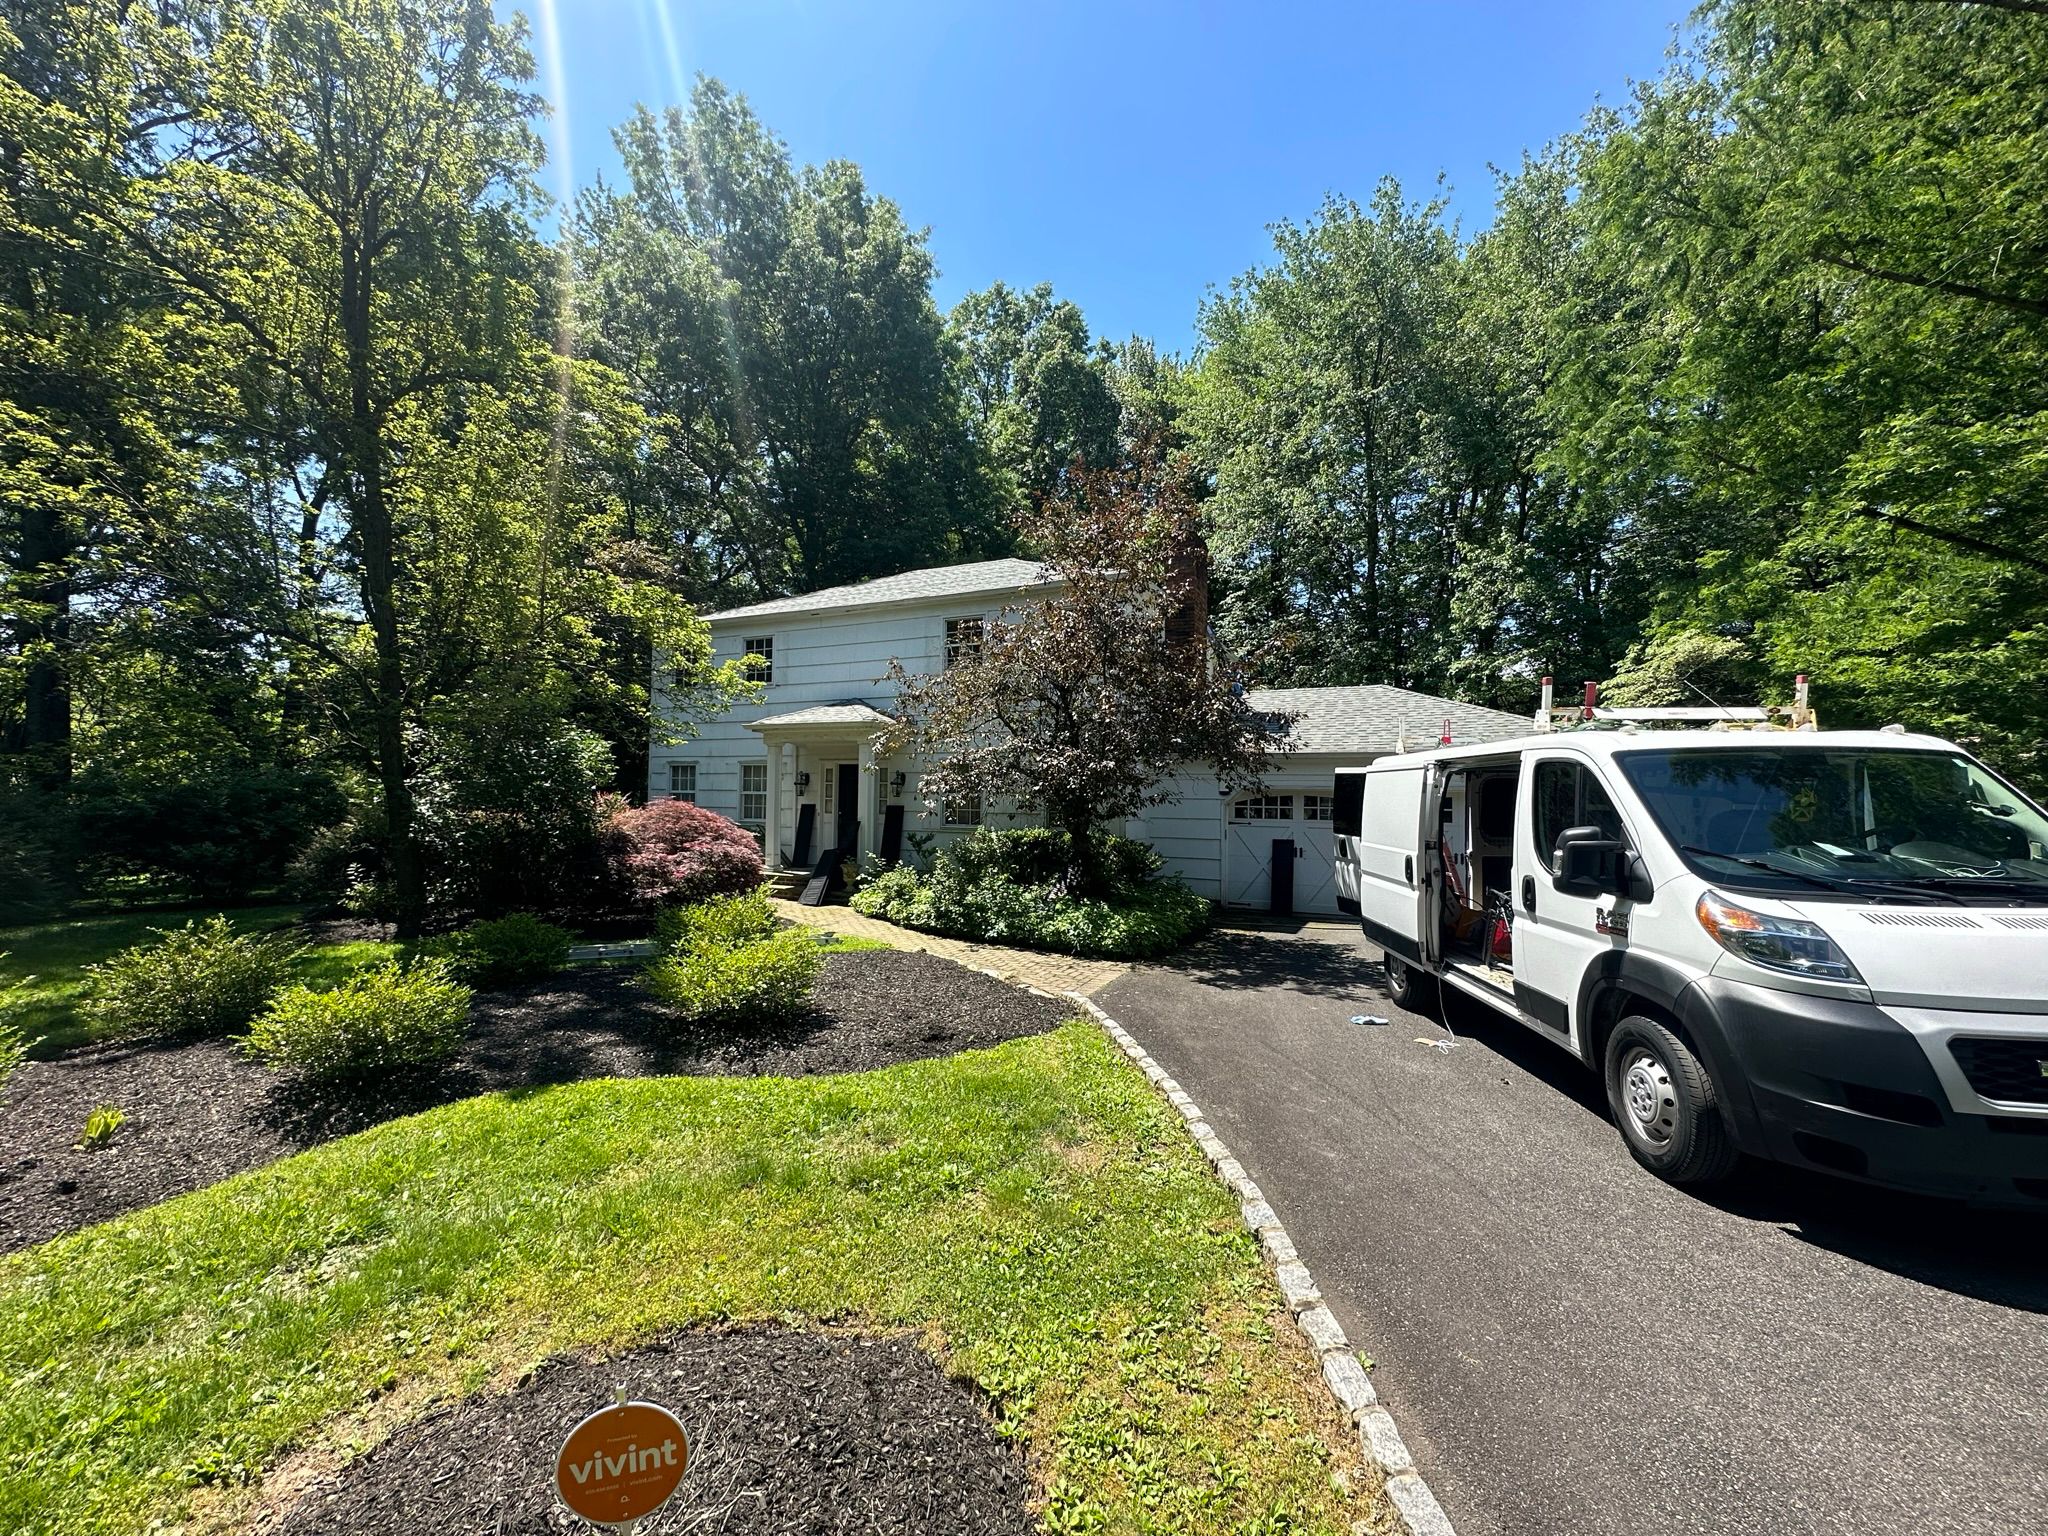 Clarke's professional van parked in front of a house.